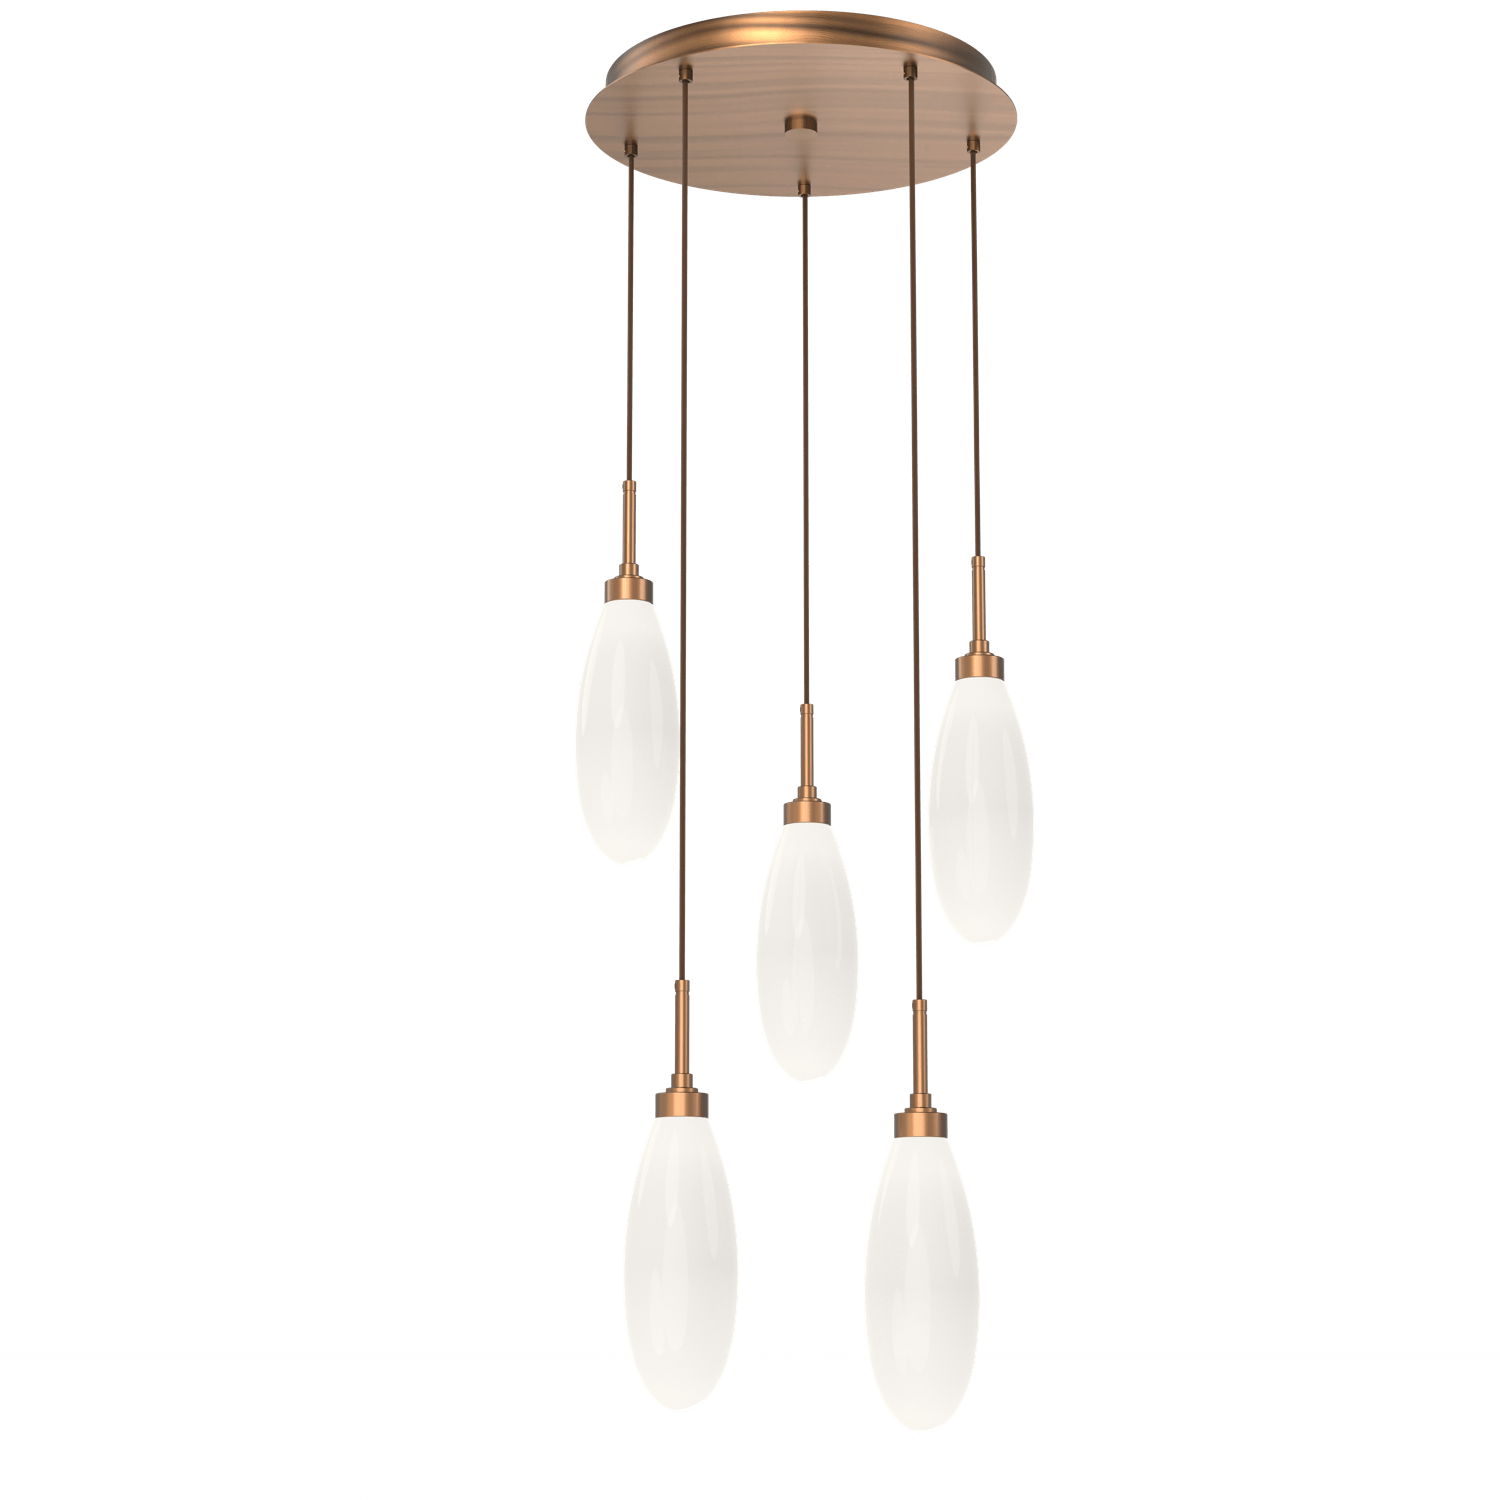 CHB0071-05-RB-WL-LL-Hammerton-Studio-Fiori-5-light-round-pendant-chandelier-with-oil-rubbed-bronze-finish-and-opal-white-glass-shades-and-LED-lamping